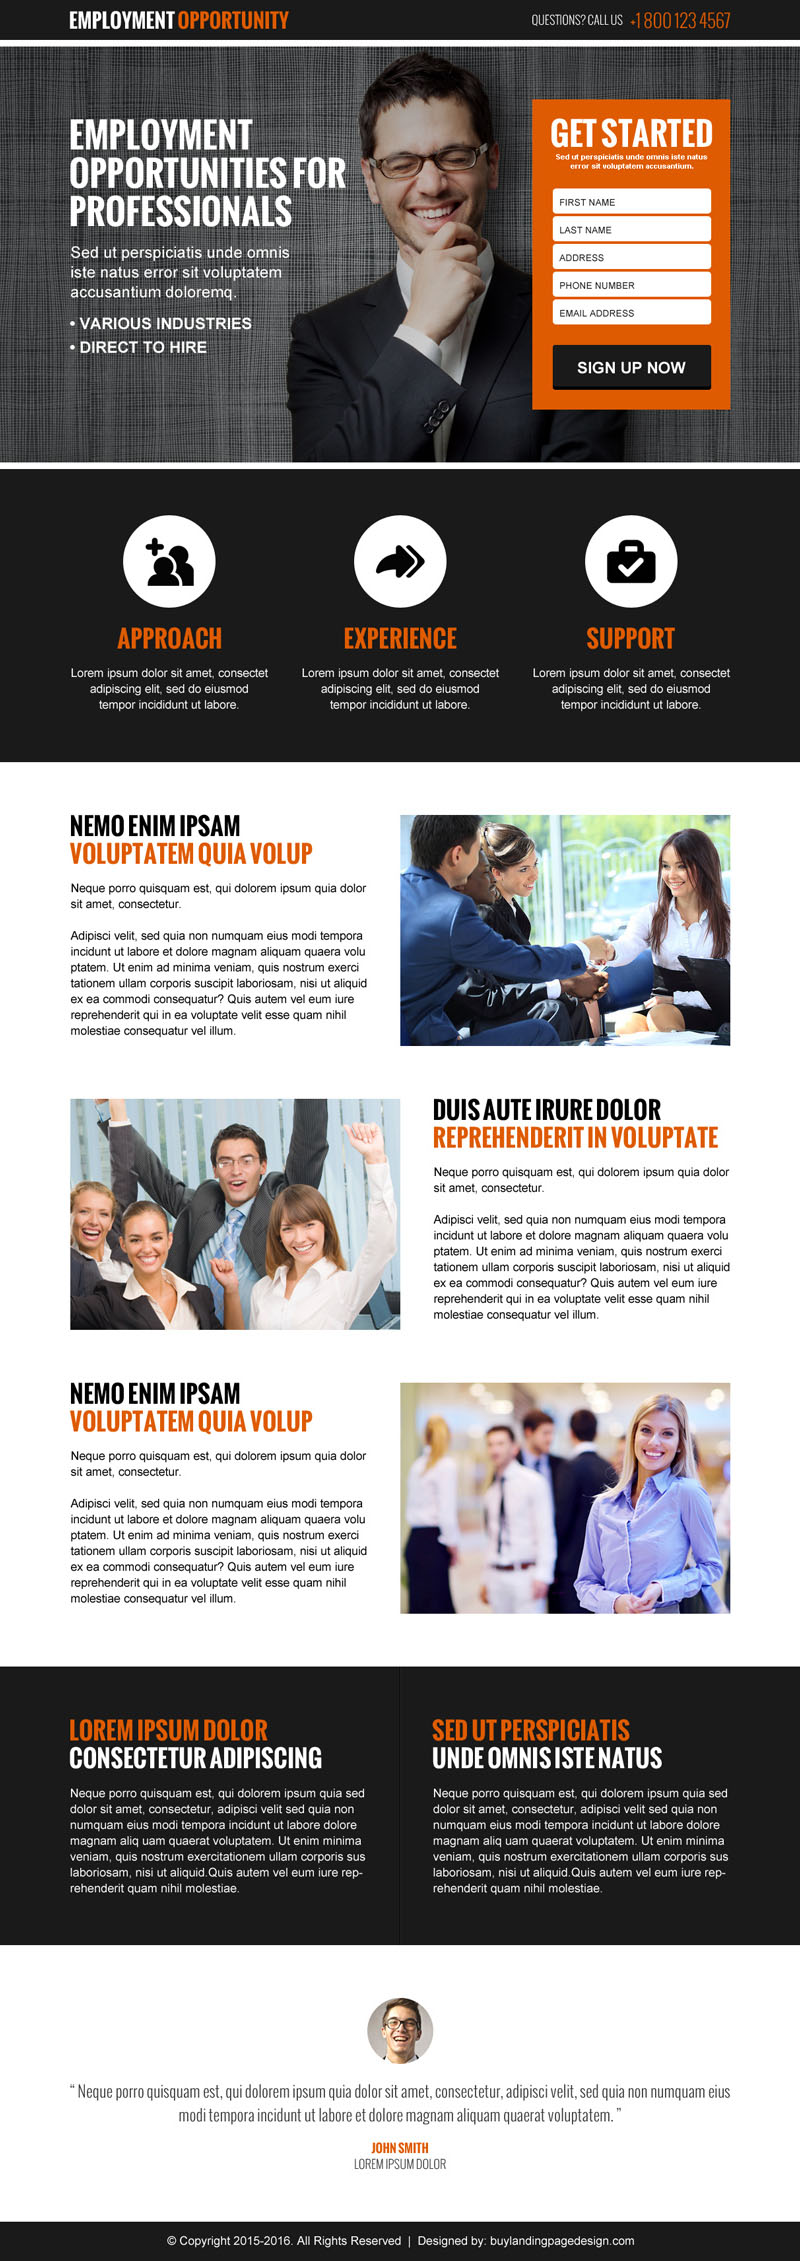 employment-opportunity-lead-generation-landing-page-design-template-001